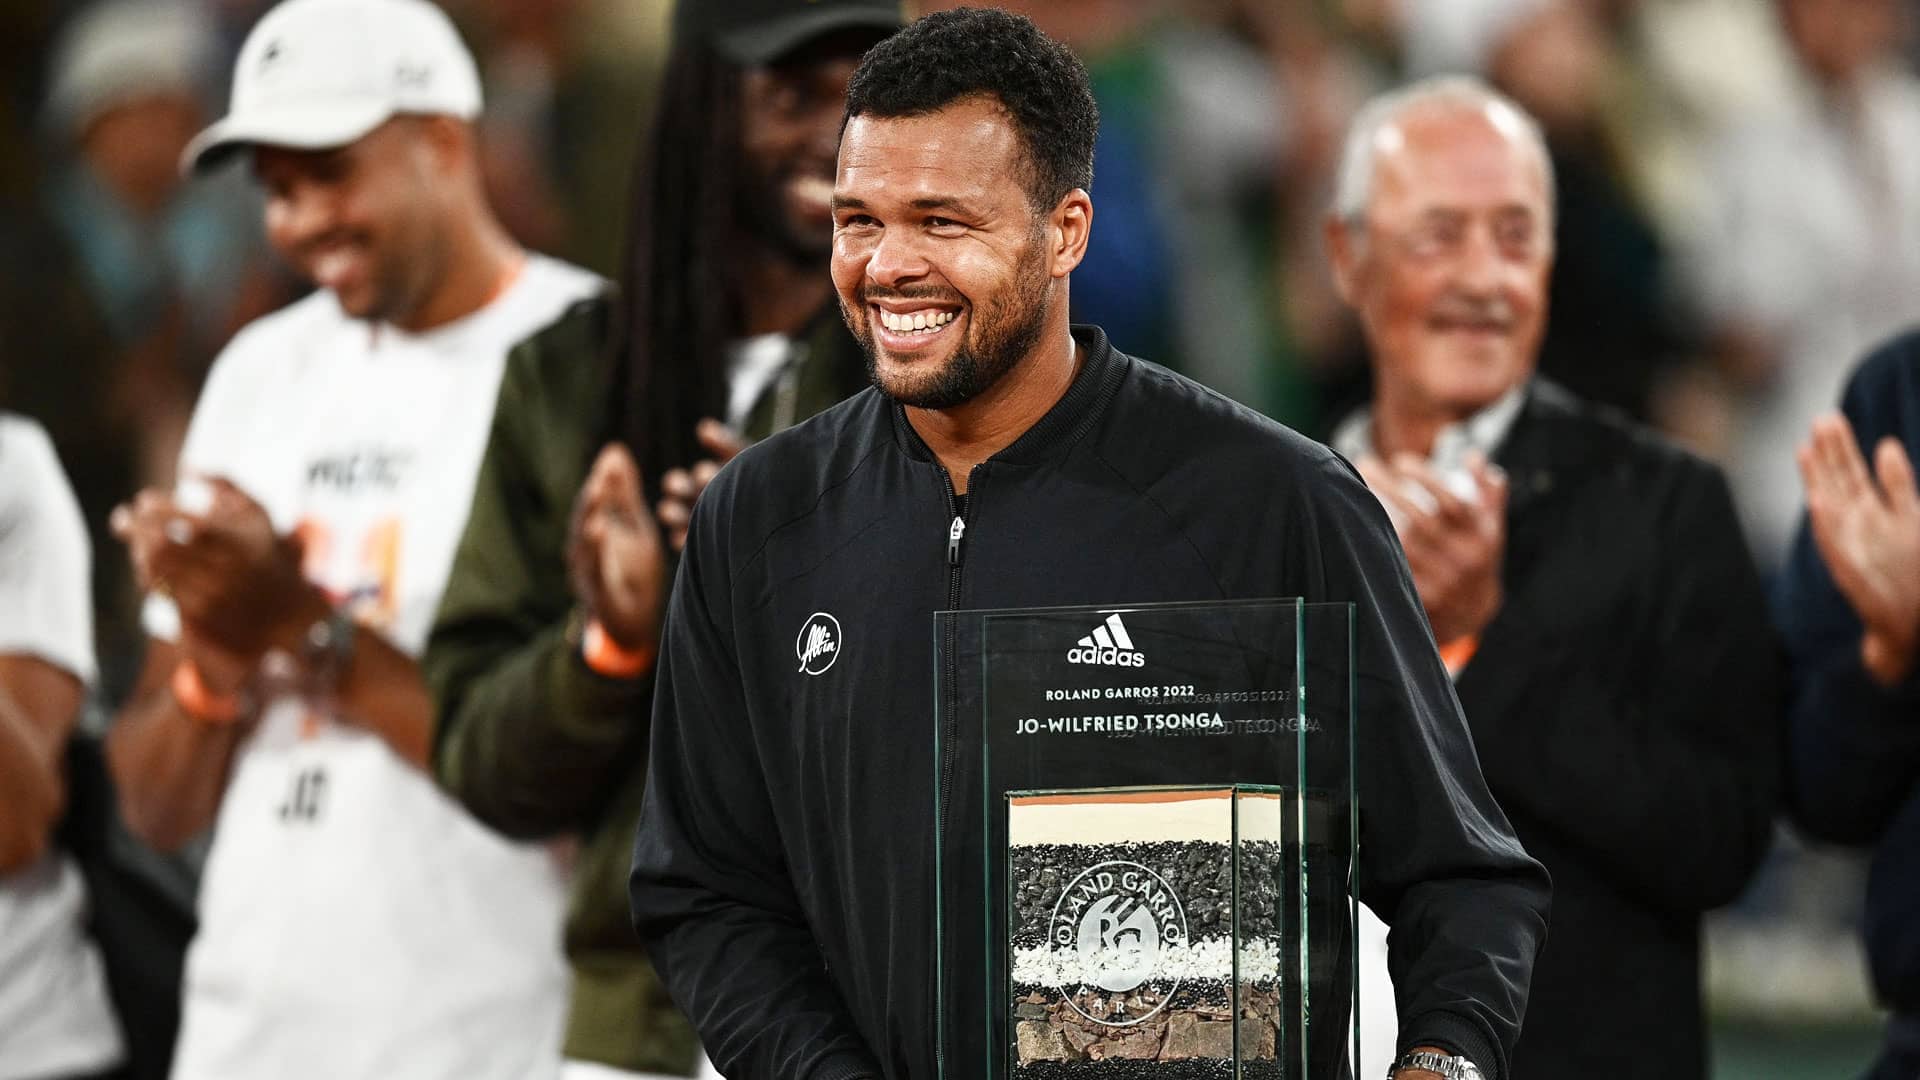 Jo-Wilfried Tsonga took in an on-court ceremony celebrating his career at Roland Garros.